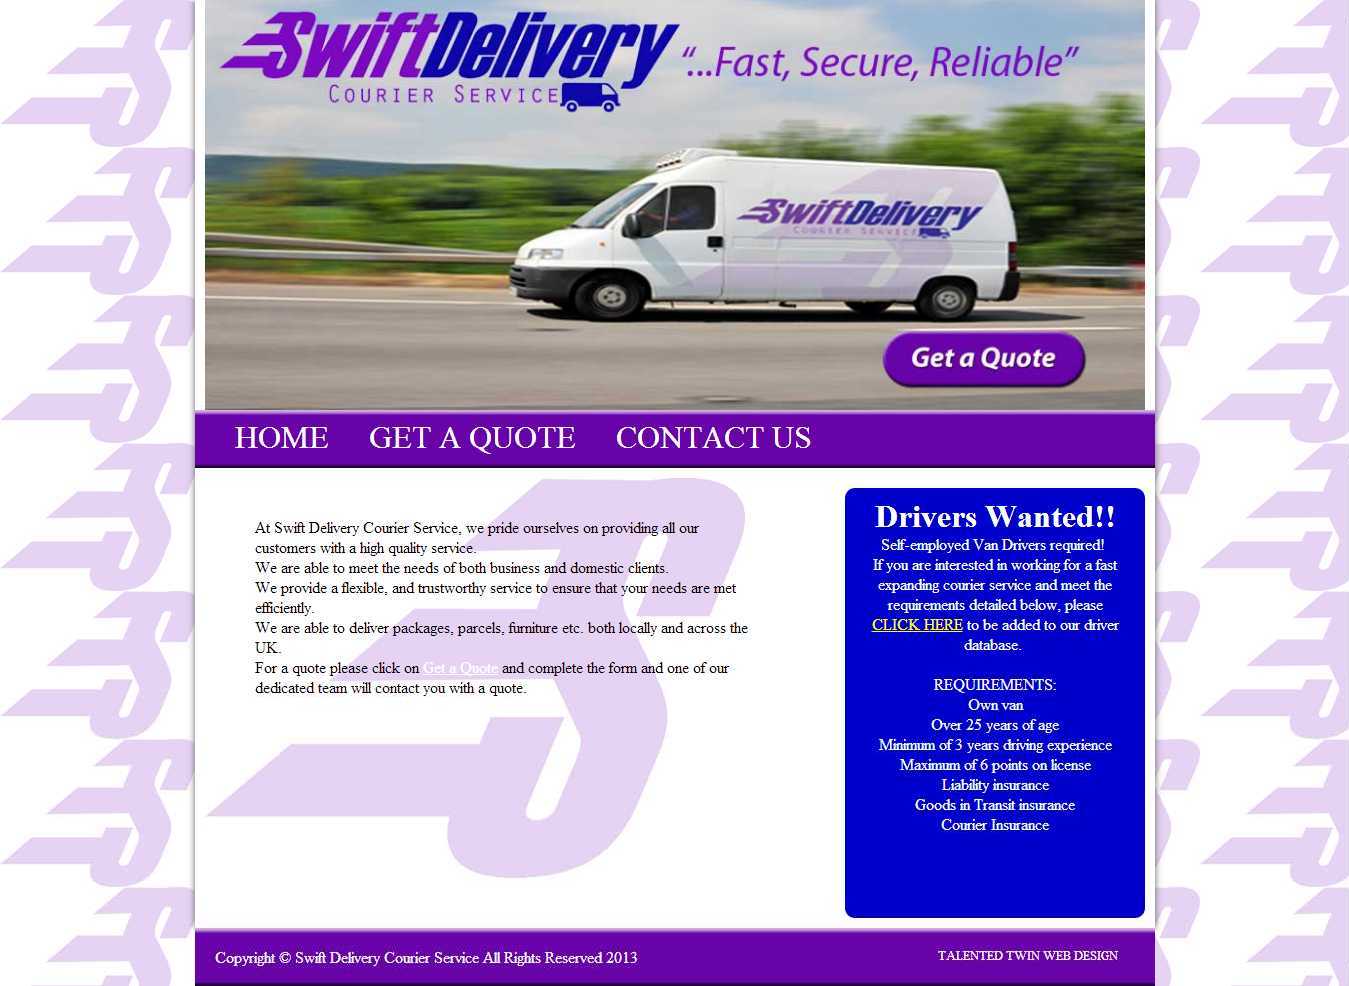 Swift Delivery Courier Service Homepage